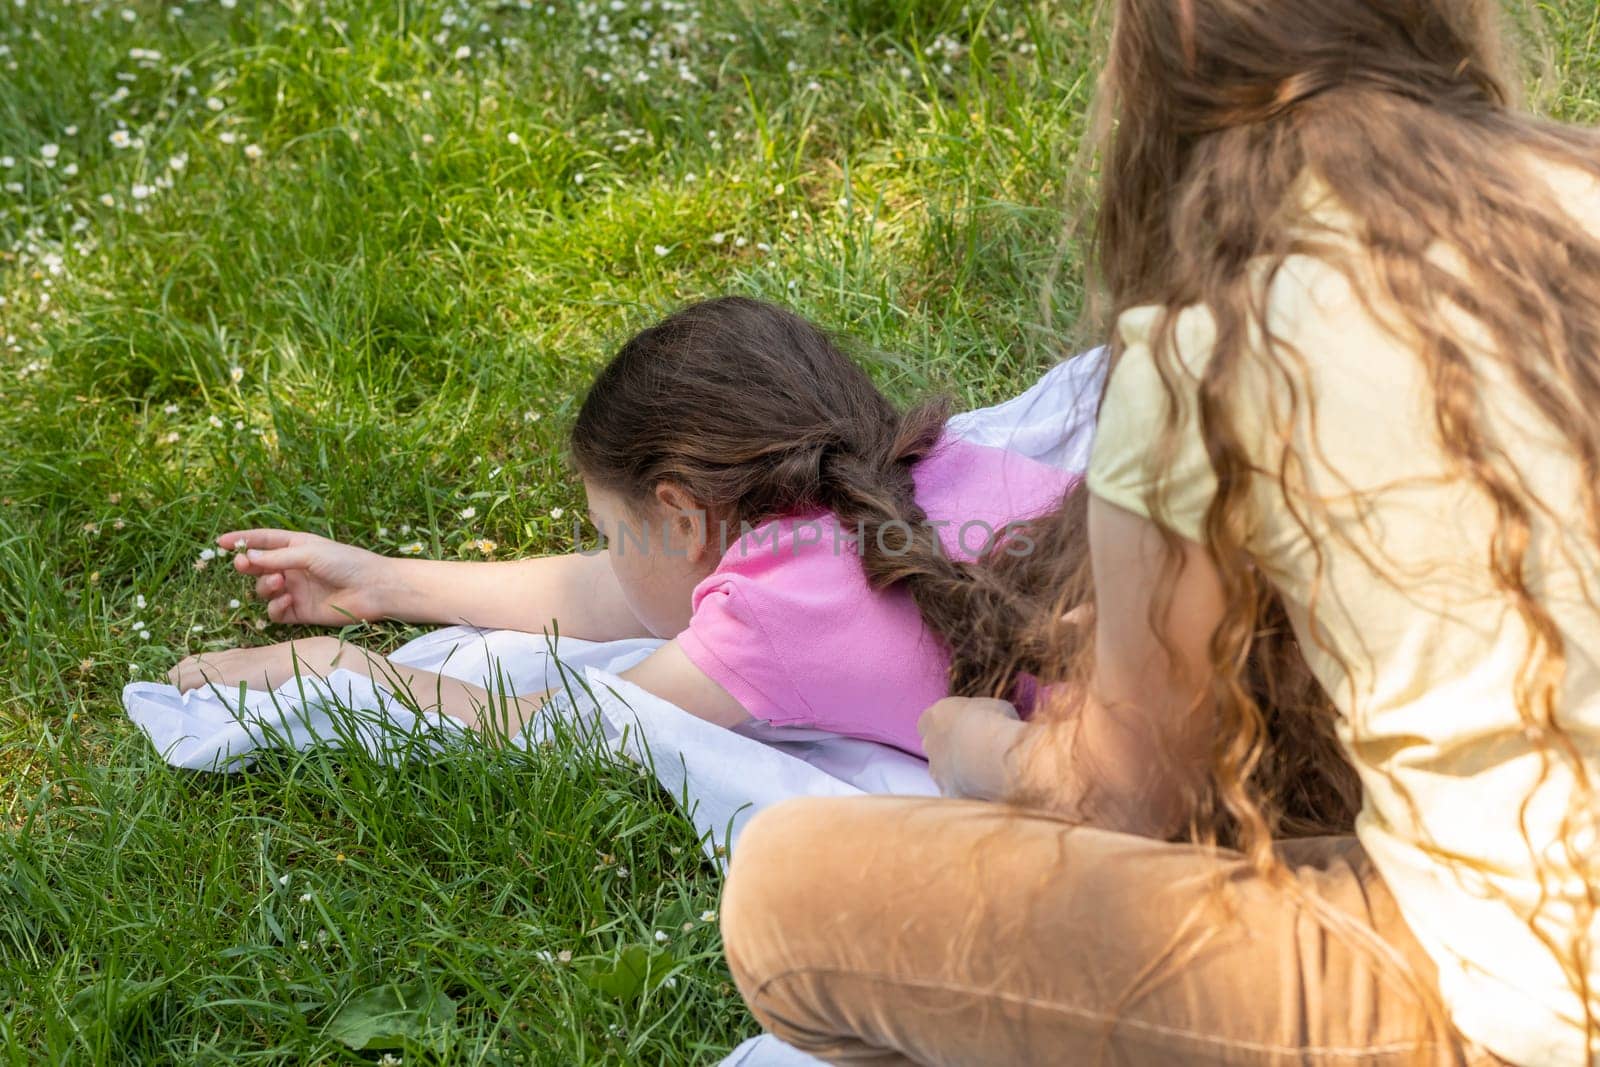 View From Back Little Girl With Long Hair braids Sister's Hair Sitting On Grass in Meadow At Sunny Day. Siblings Love, Carefree Time, True Friendship, Family Lifestyle. School Break. Horizontal Plane. by netatsi